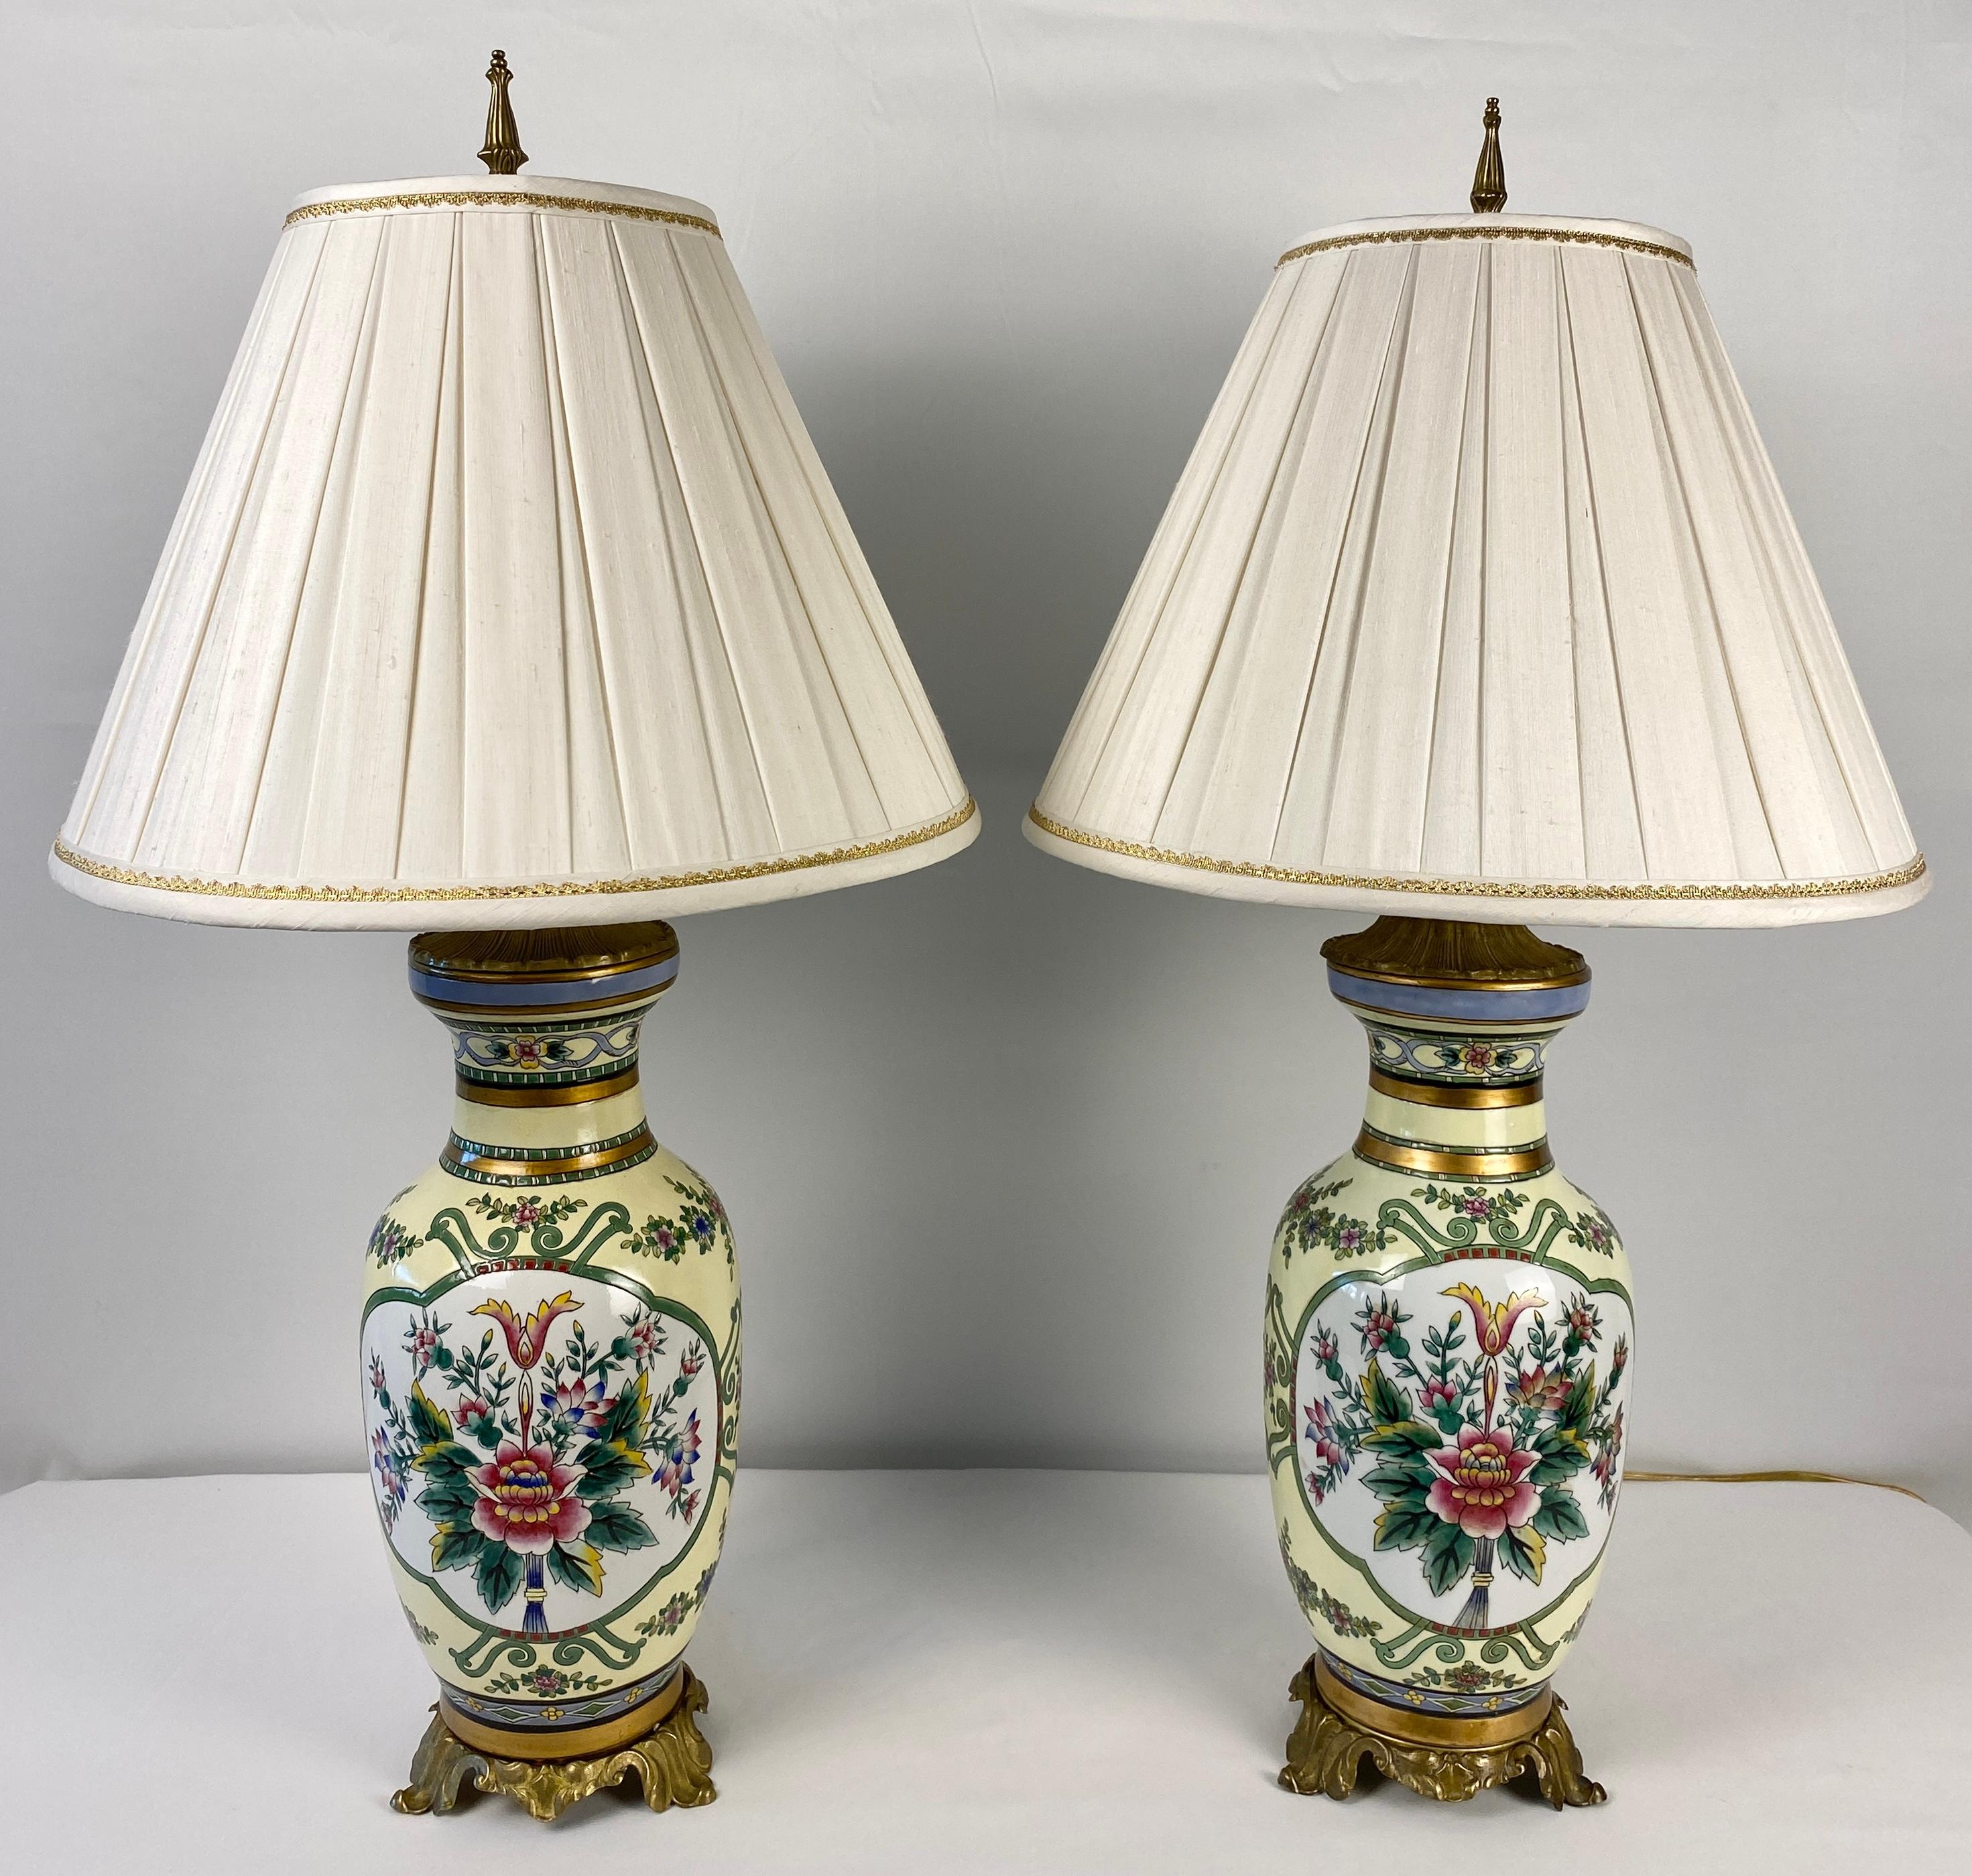 Pair of beautiful, French hand-painted porcelain table lamps with floral decor each mounted on a gilt bronze base. 

Adorned with a rich painted finish in the white, yellow, green and rose palette. Place this pair of French hand-painted porcelain